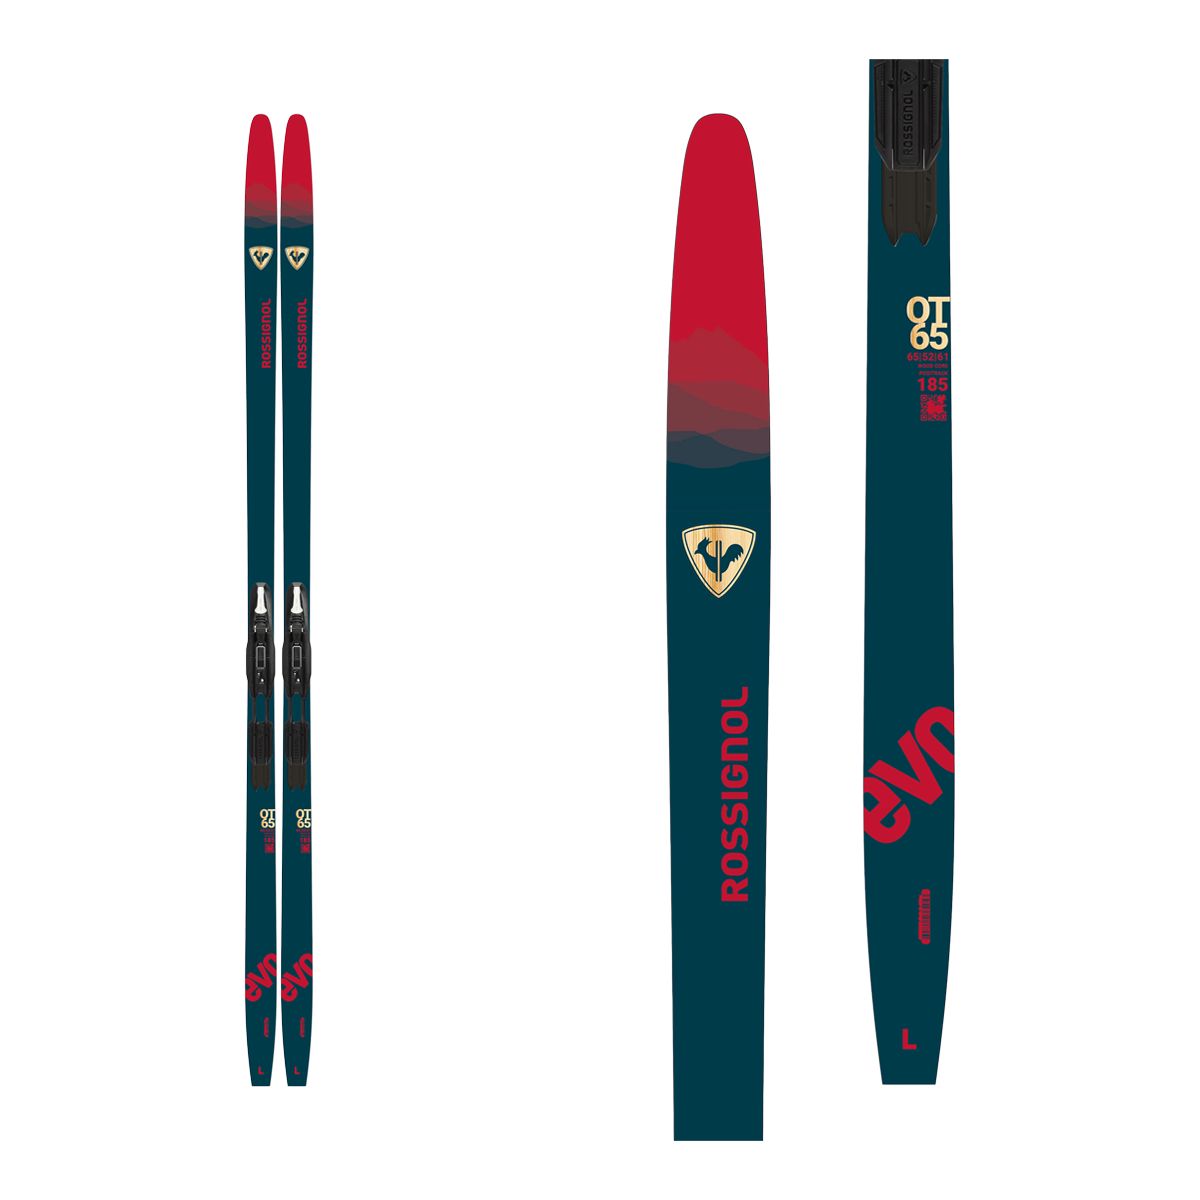 Image of Rossignol Evo OT 65 IFP Positrack Skis with Control 2023/24